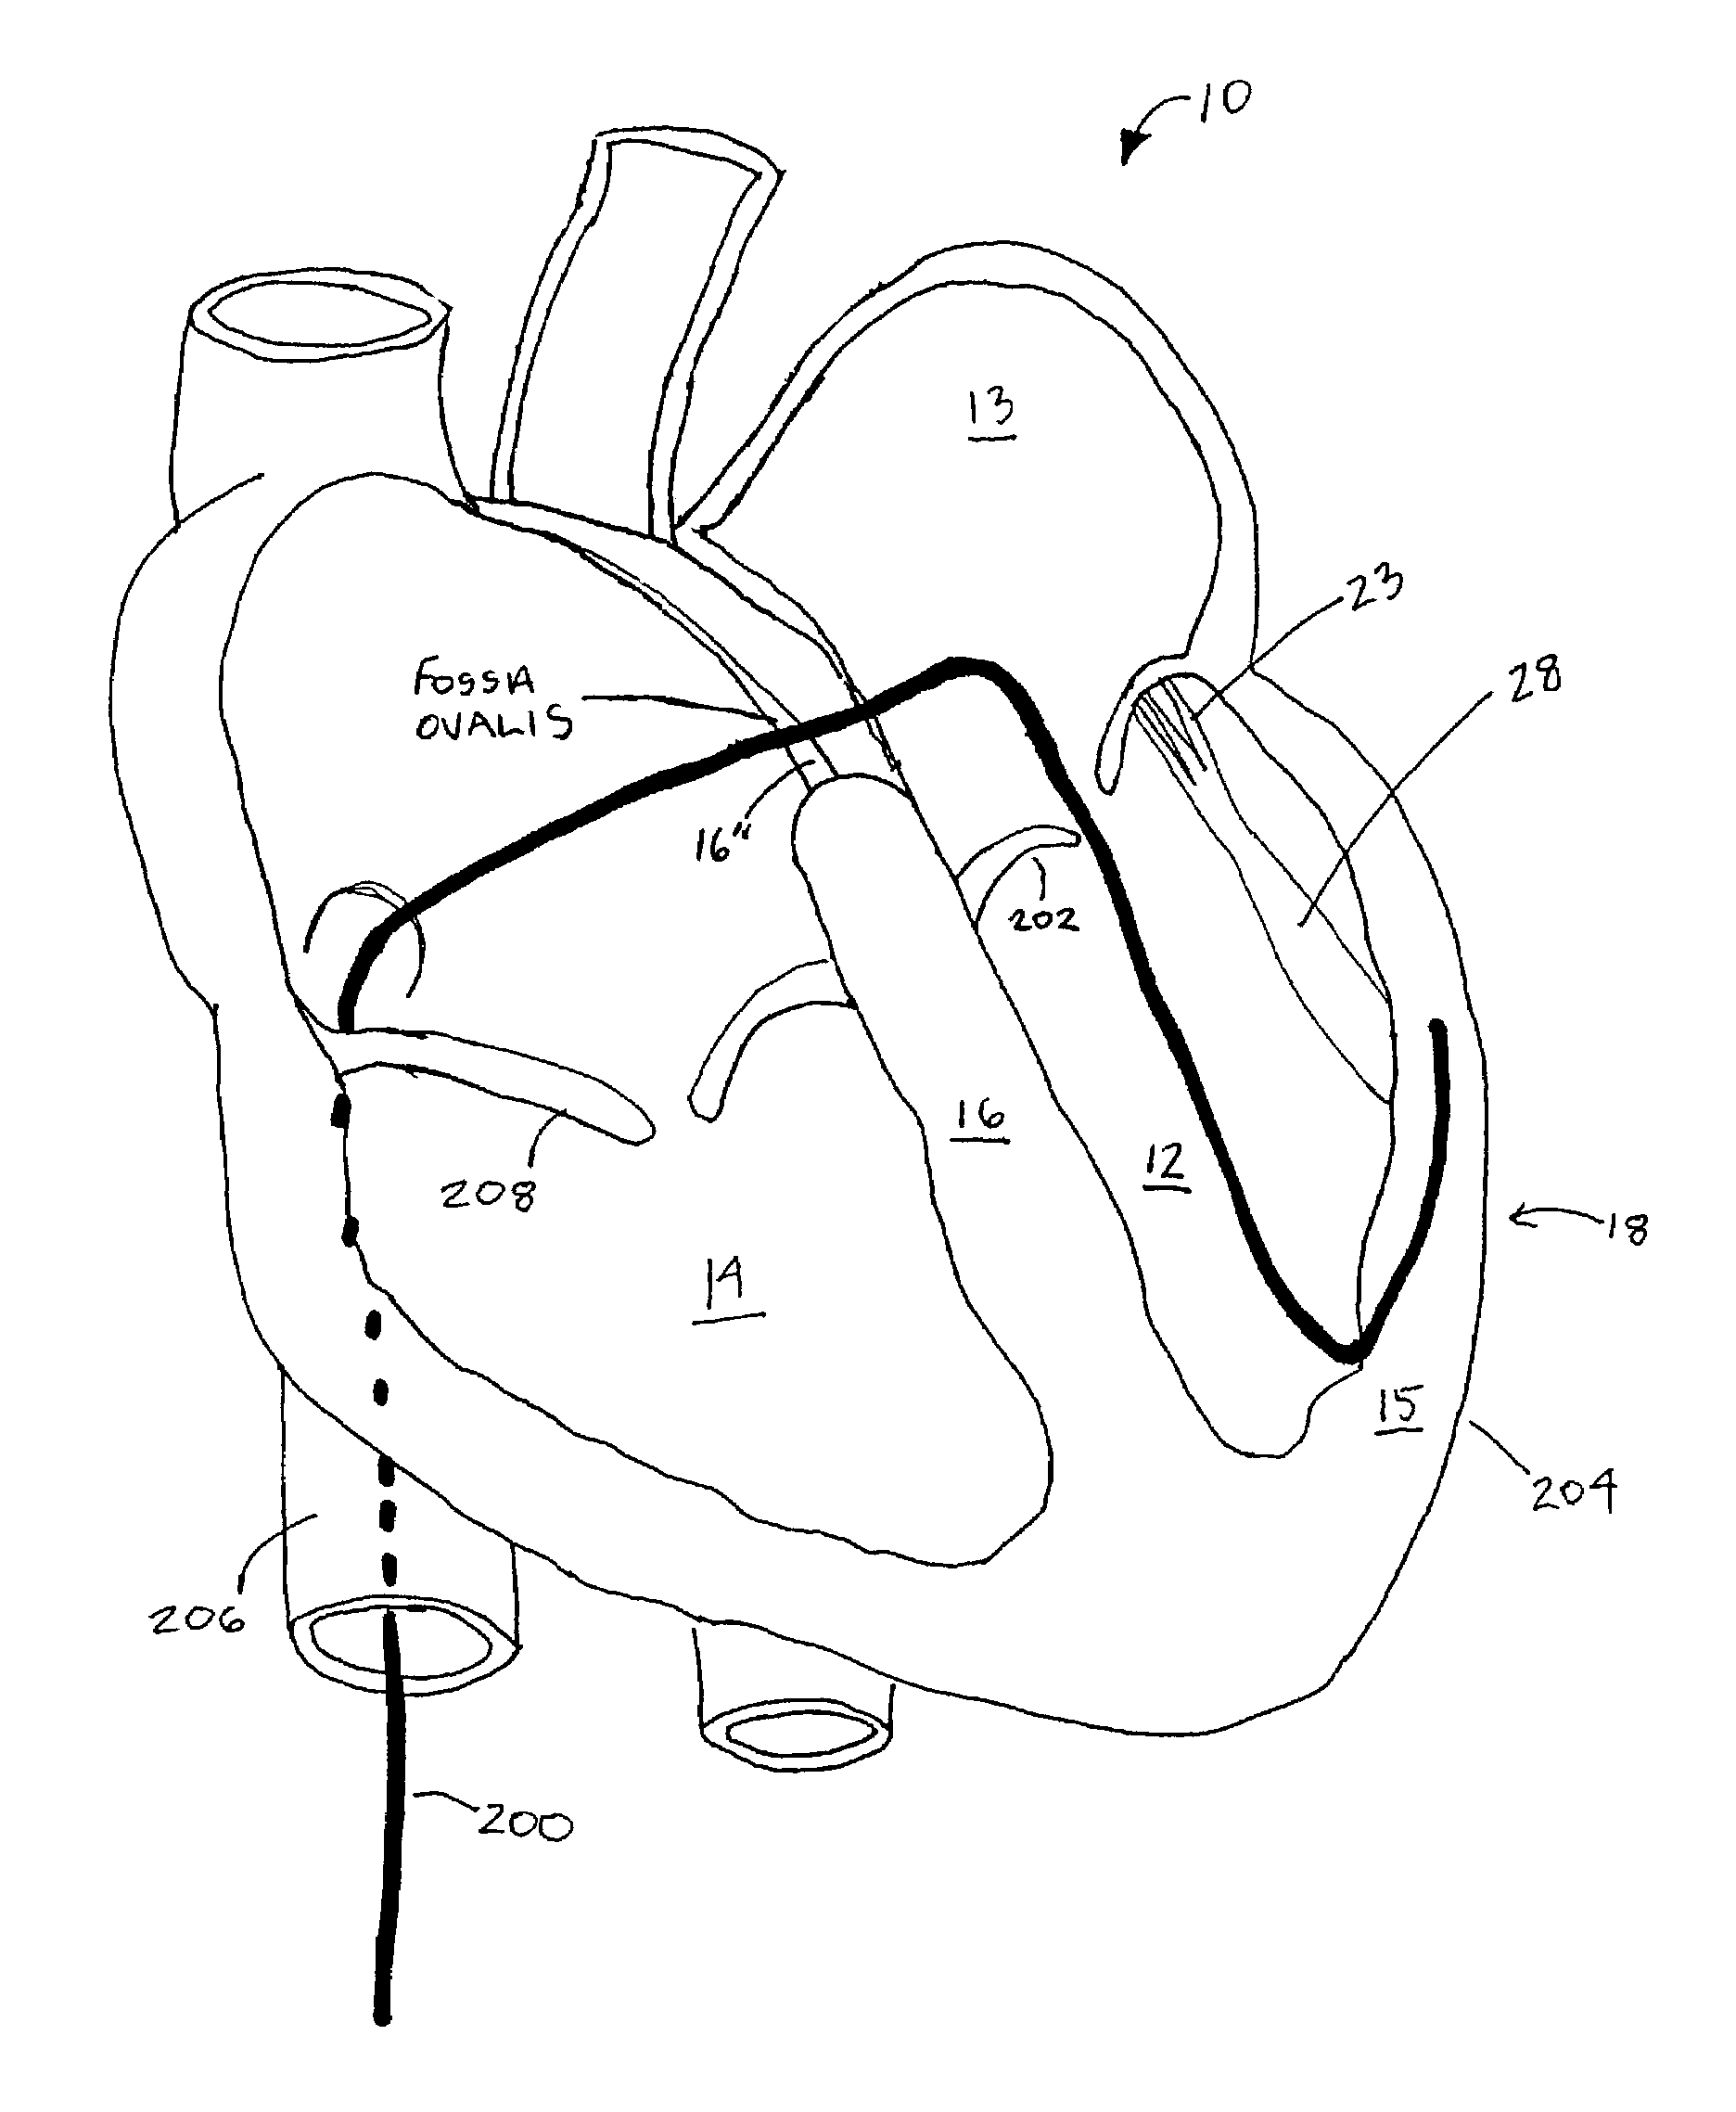 Prevention of myocardial infarction induced ventricular expansion and remodeling